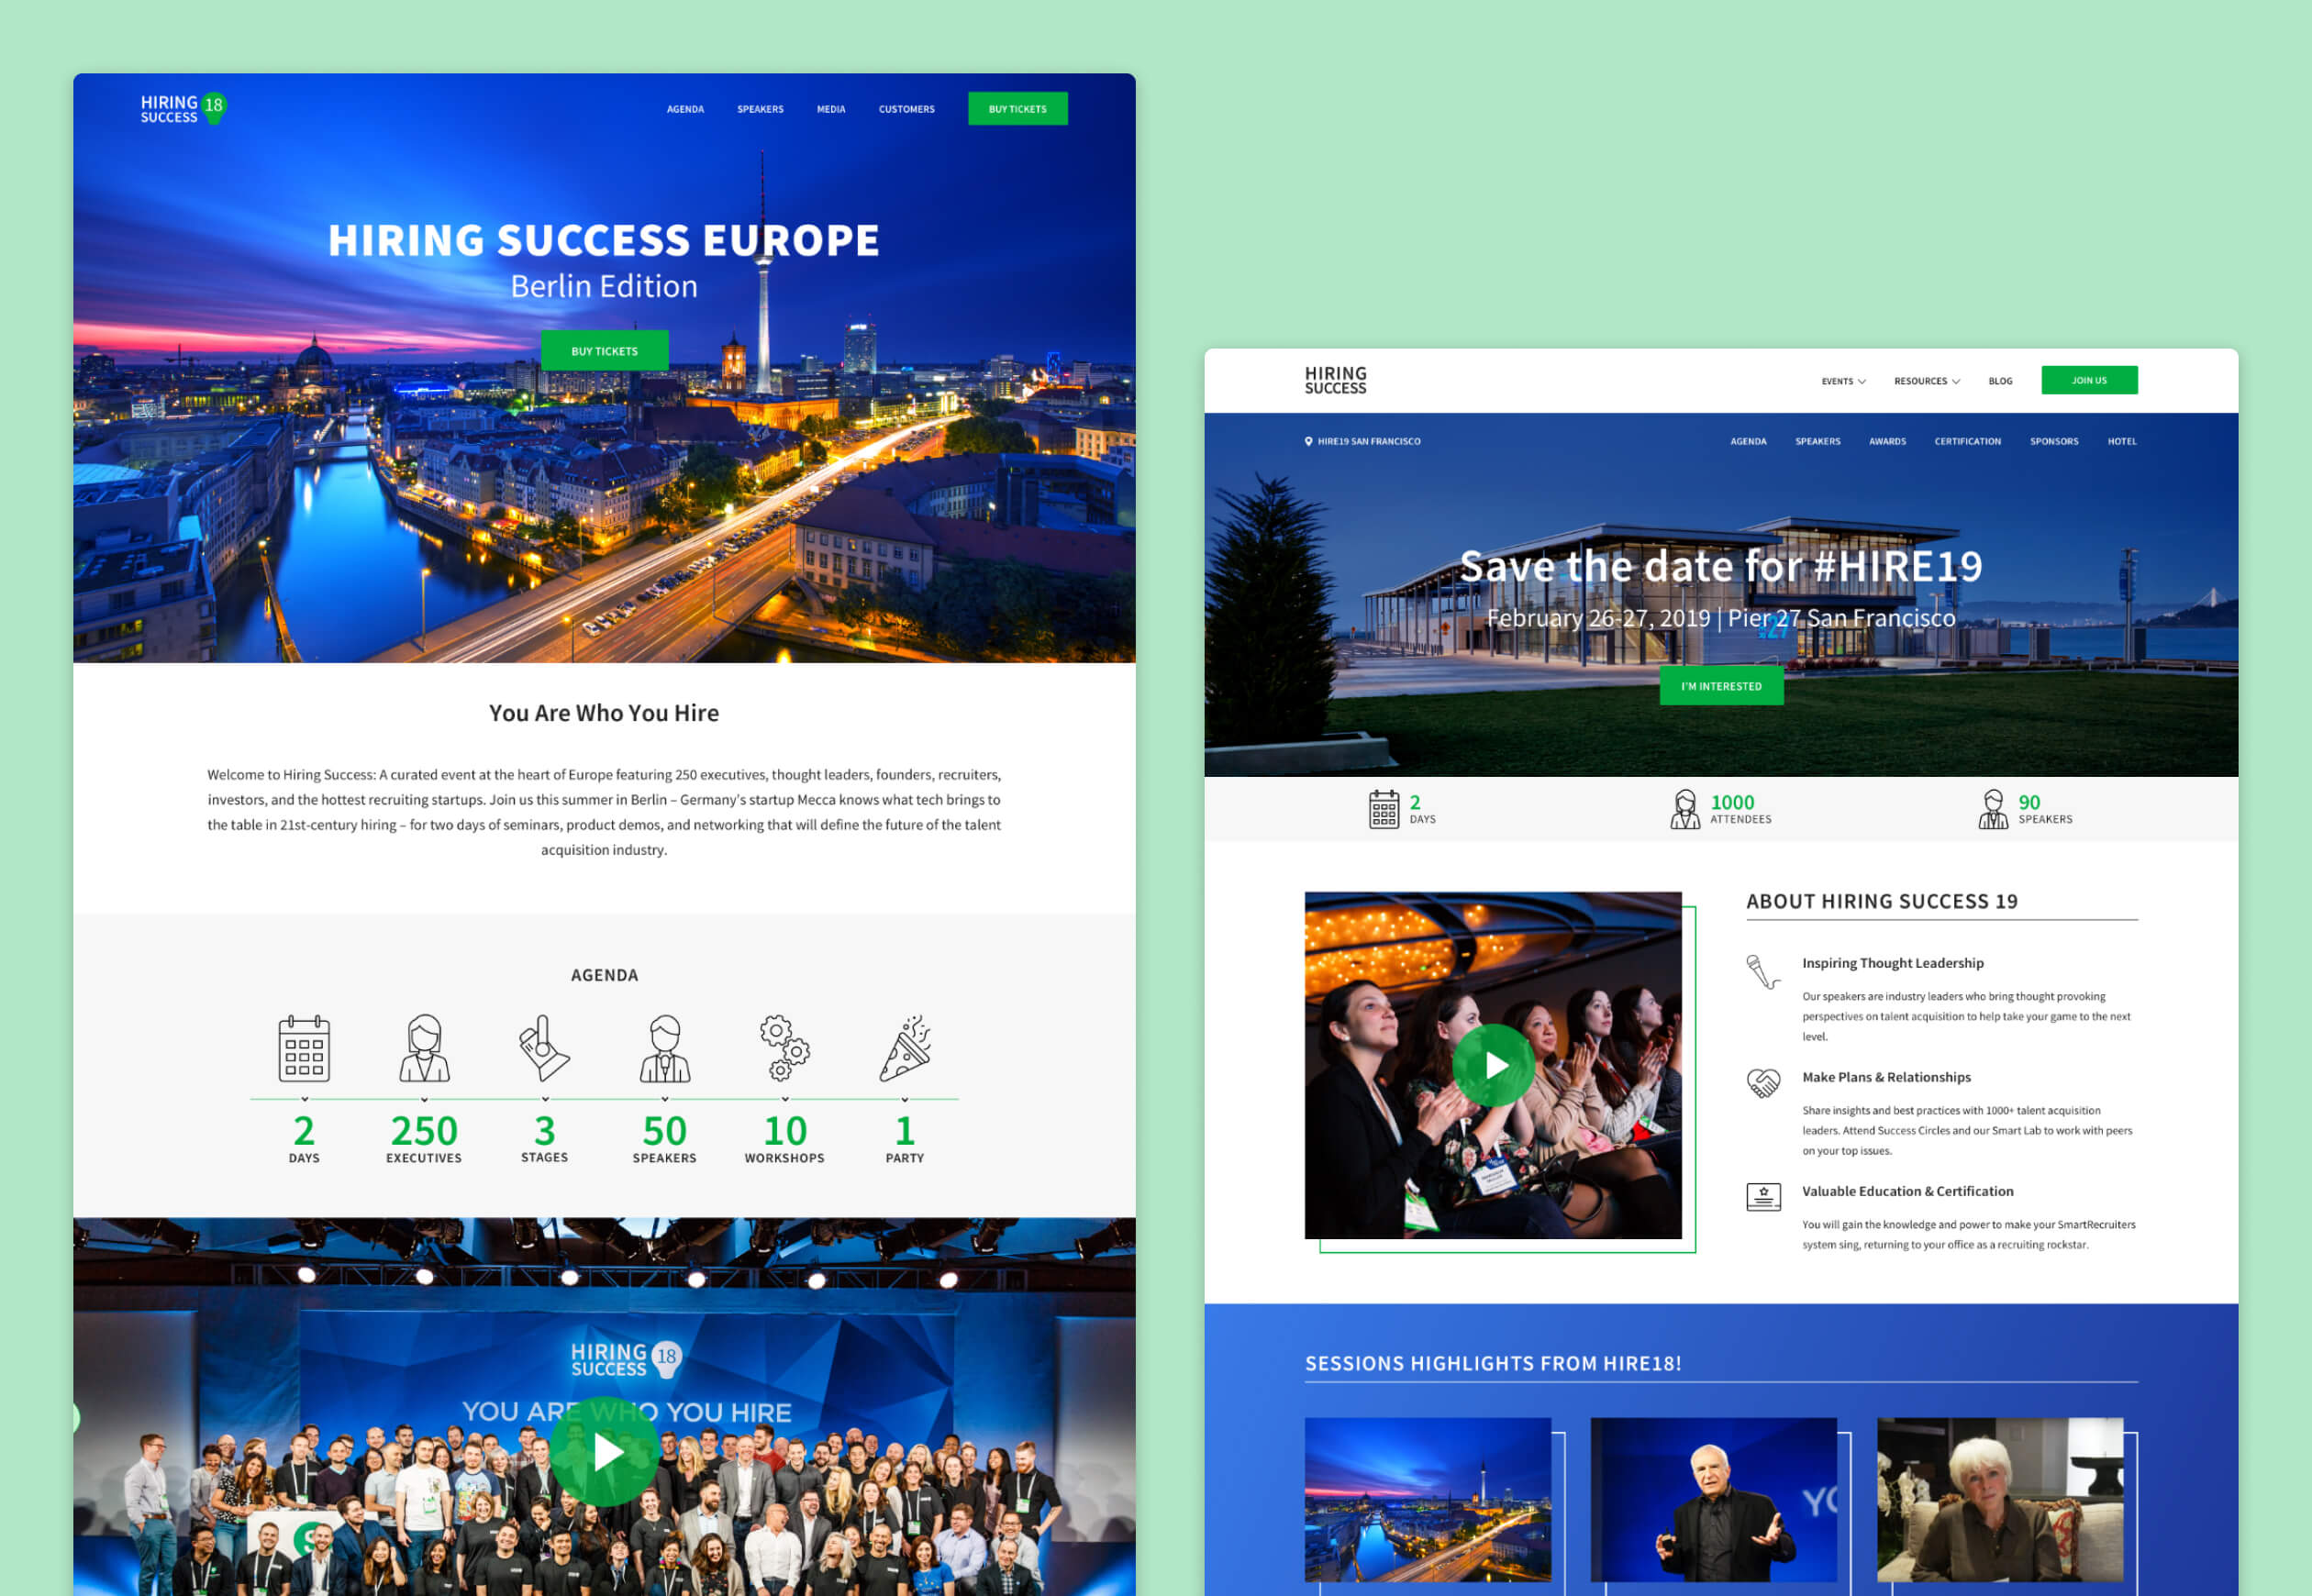 Landing pages for 2 different events